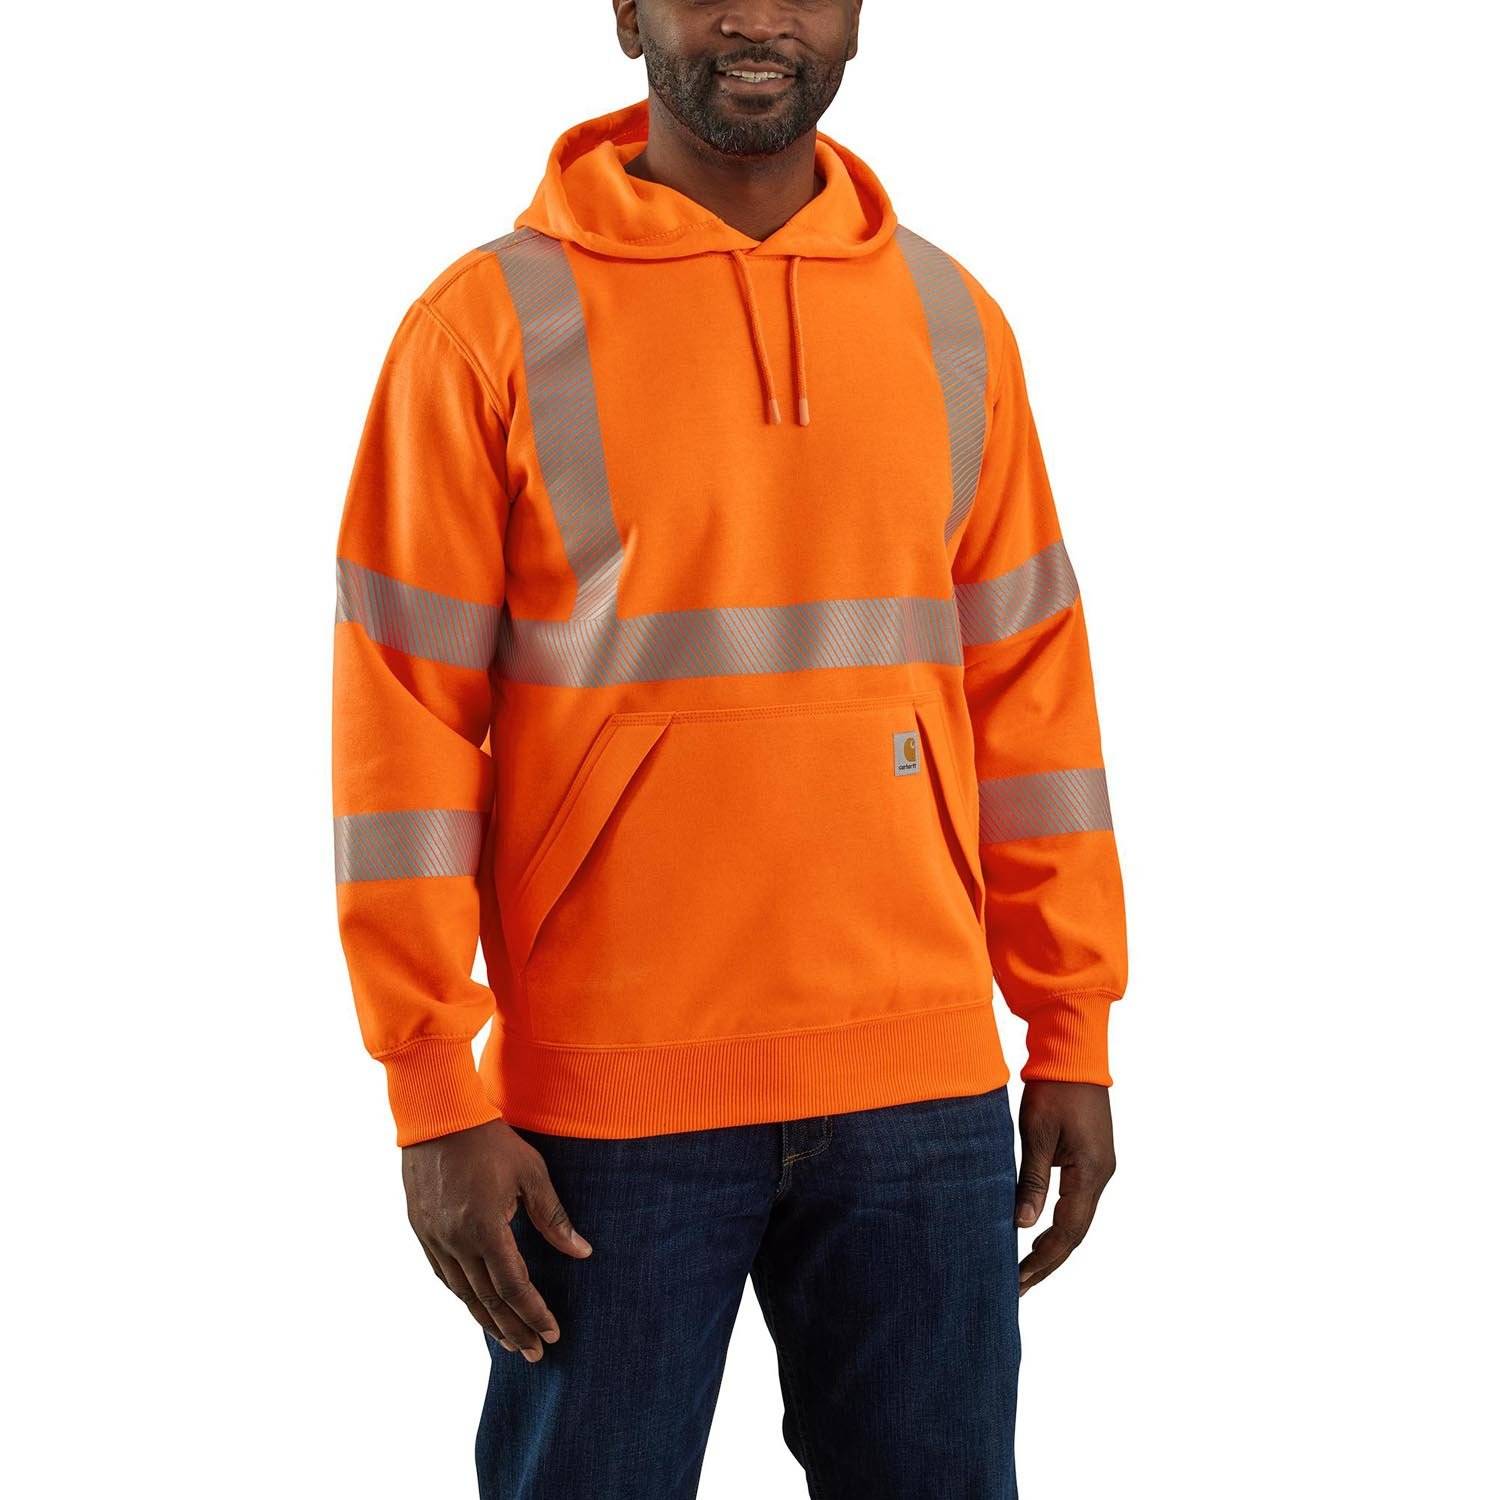 Carhartt High-Visibility Loose Fit Midweight Class 3 Sweatsh